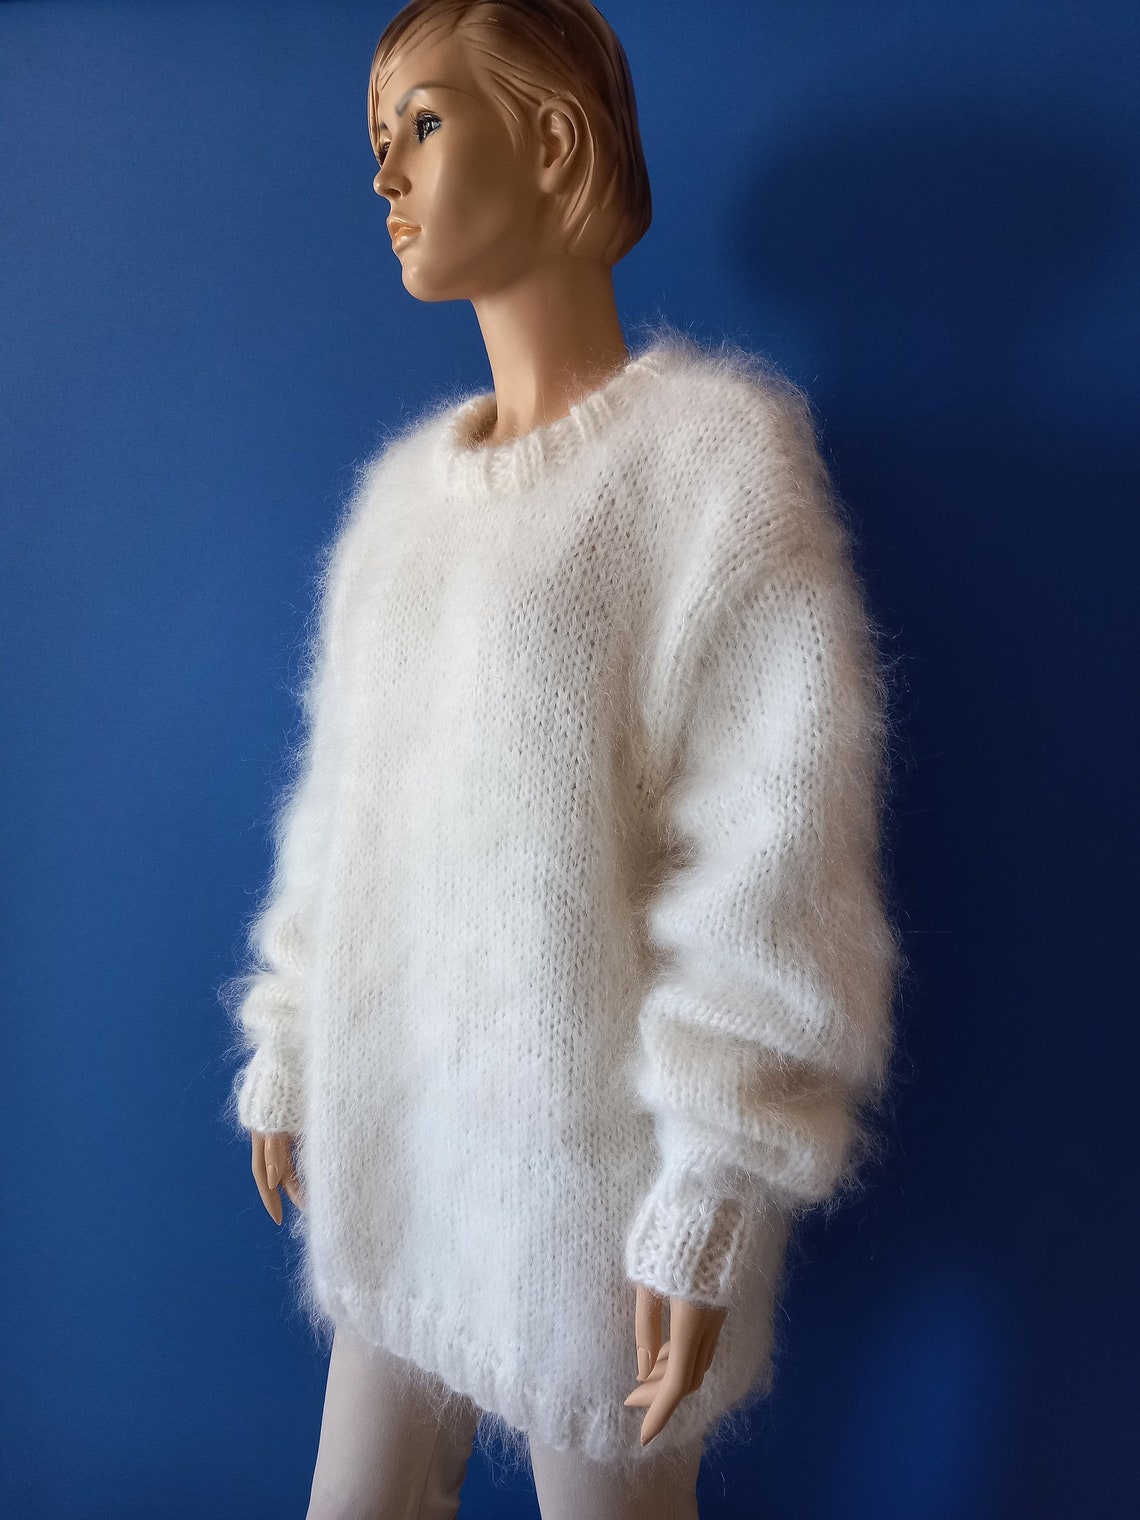 Made to Order New Hand Knitted WHITE MOHAIR Sweater Size S - Etsy